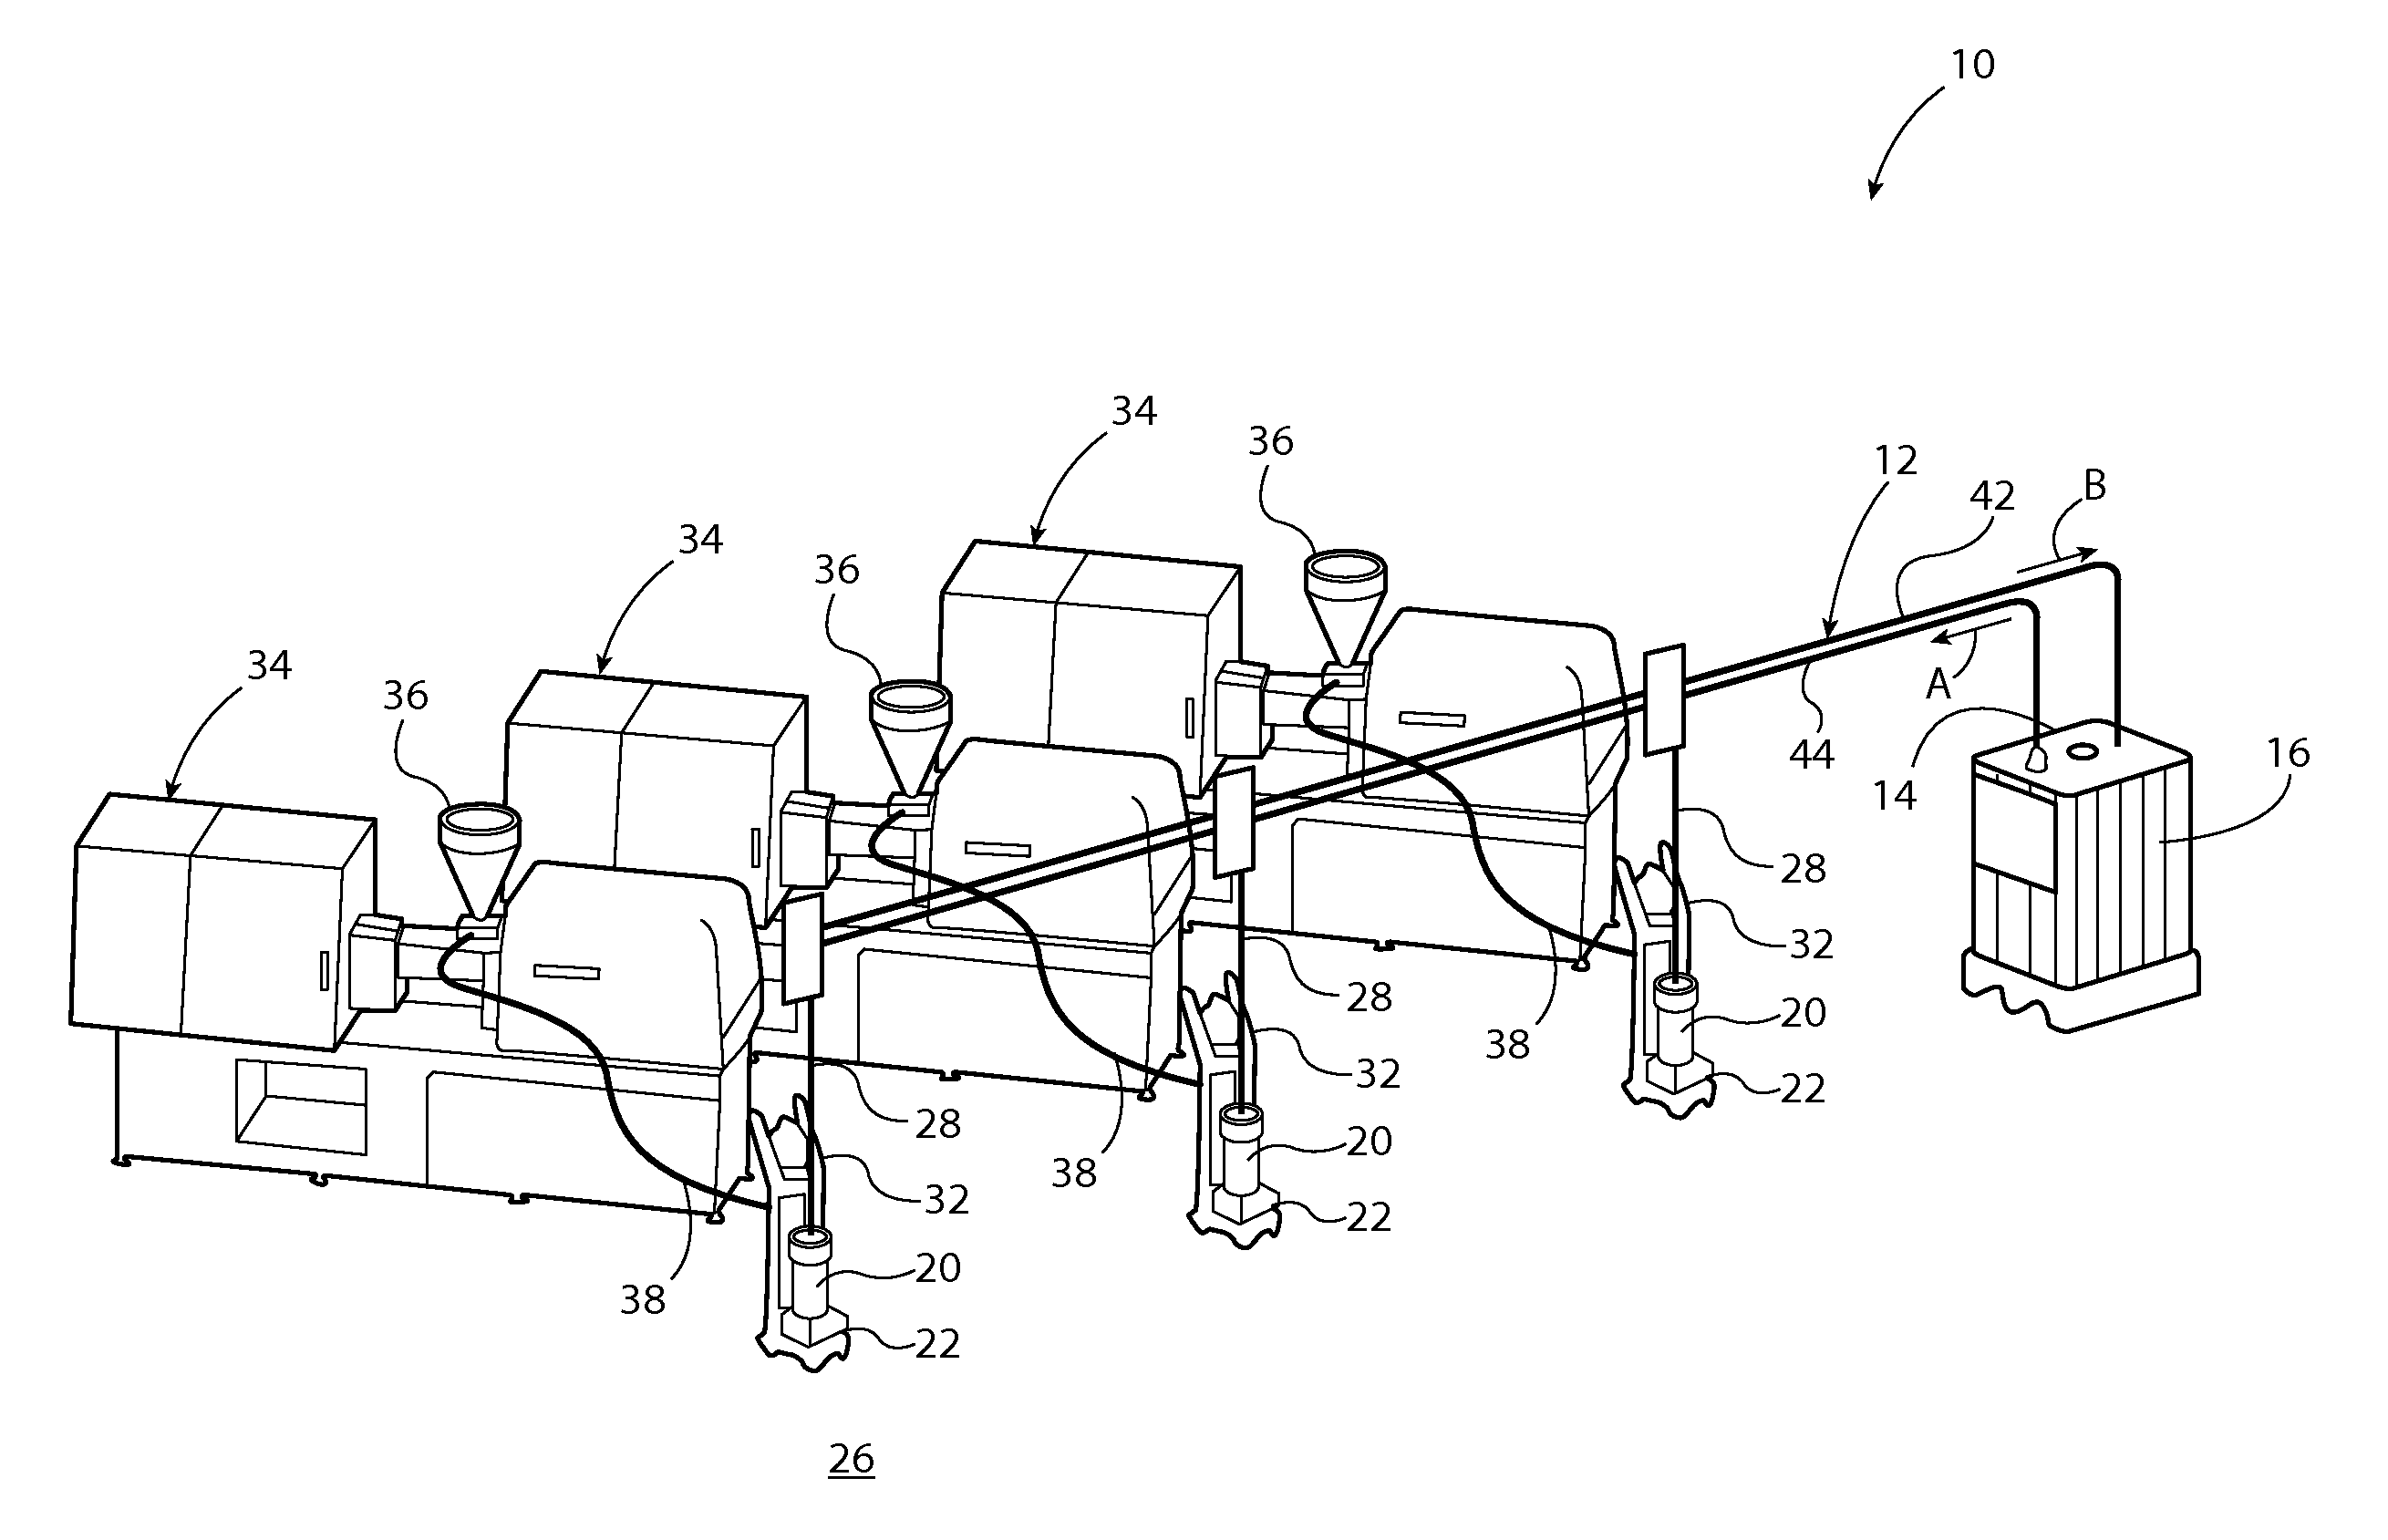 Method and apparatus for closed loop automatic refill of liquid color